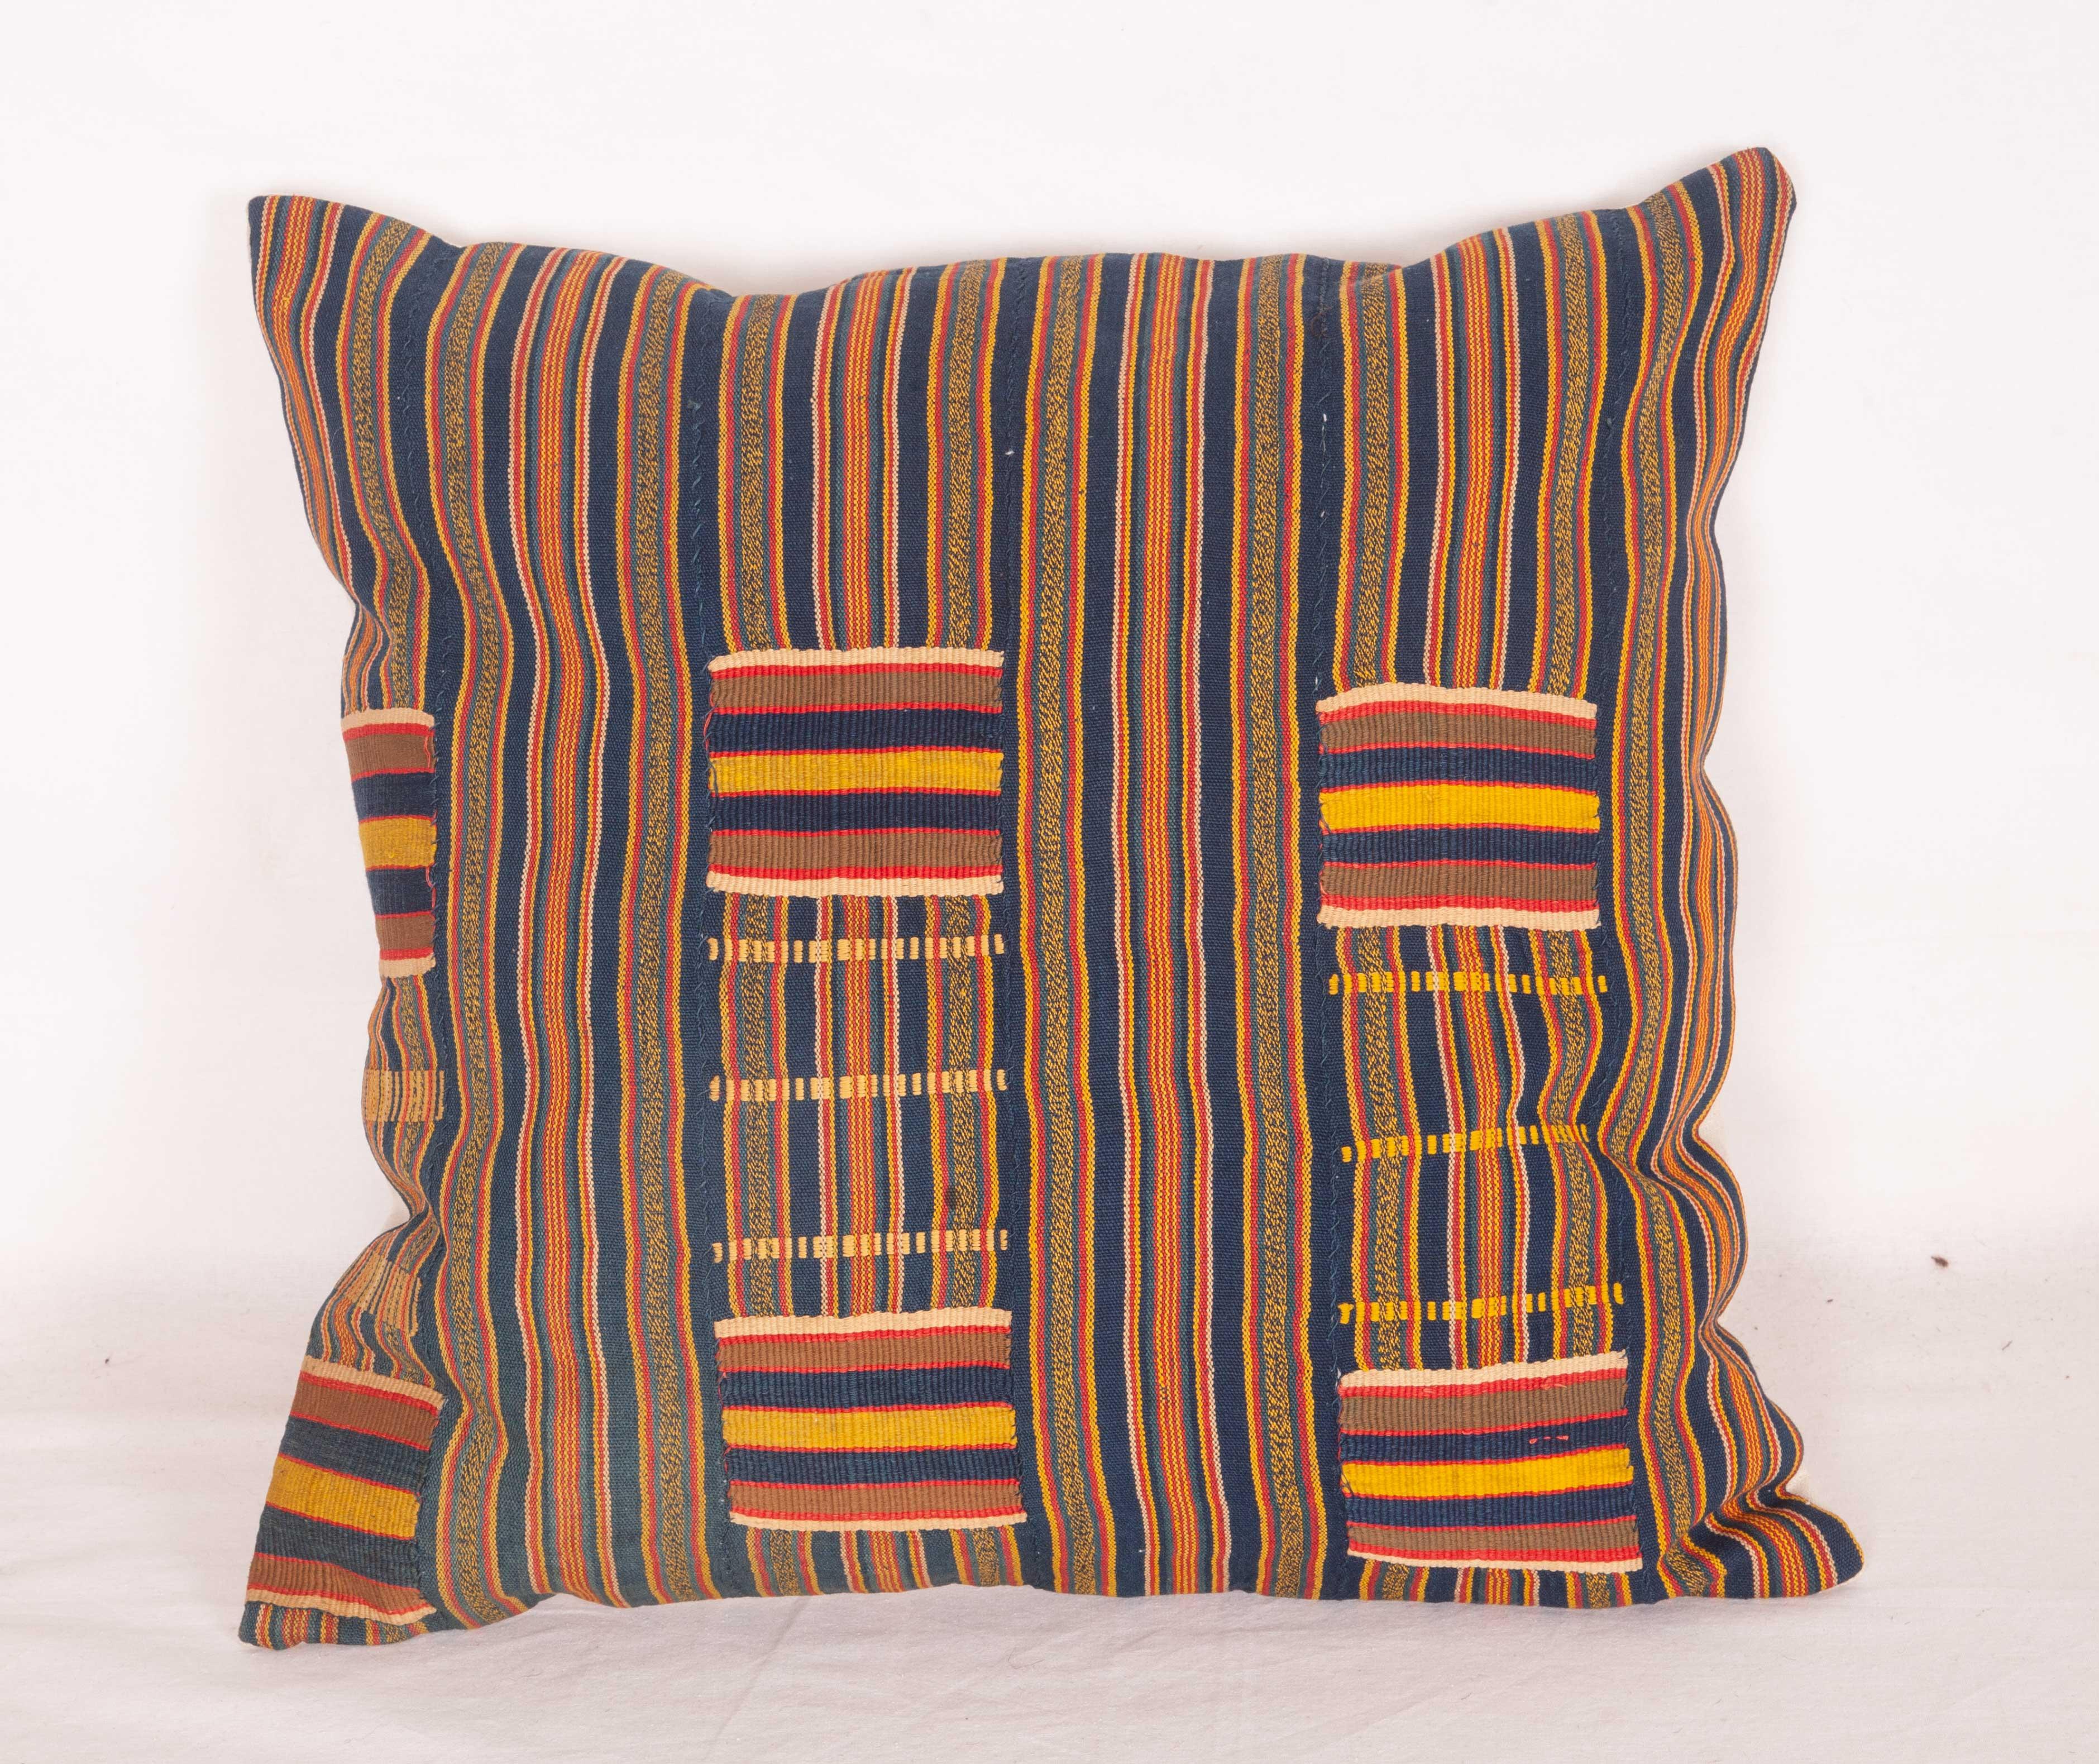 Tribal Pillow Cases Fashioned from African Kente Cloth, First Half of the 20th Century